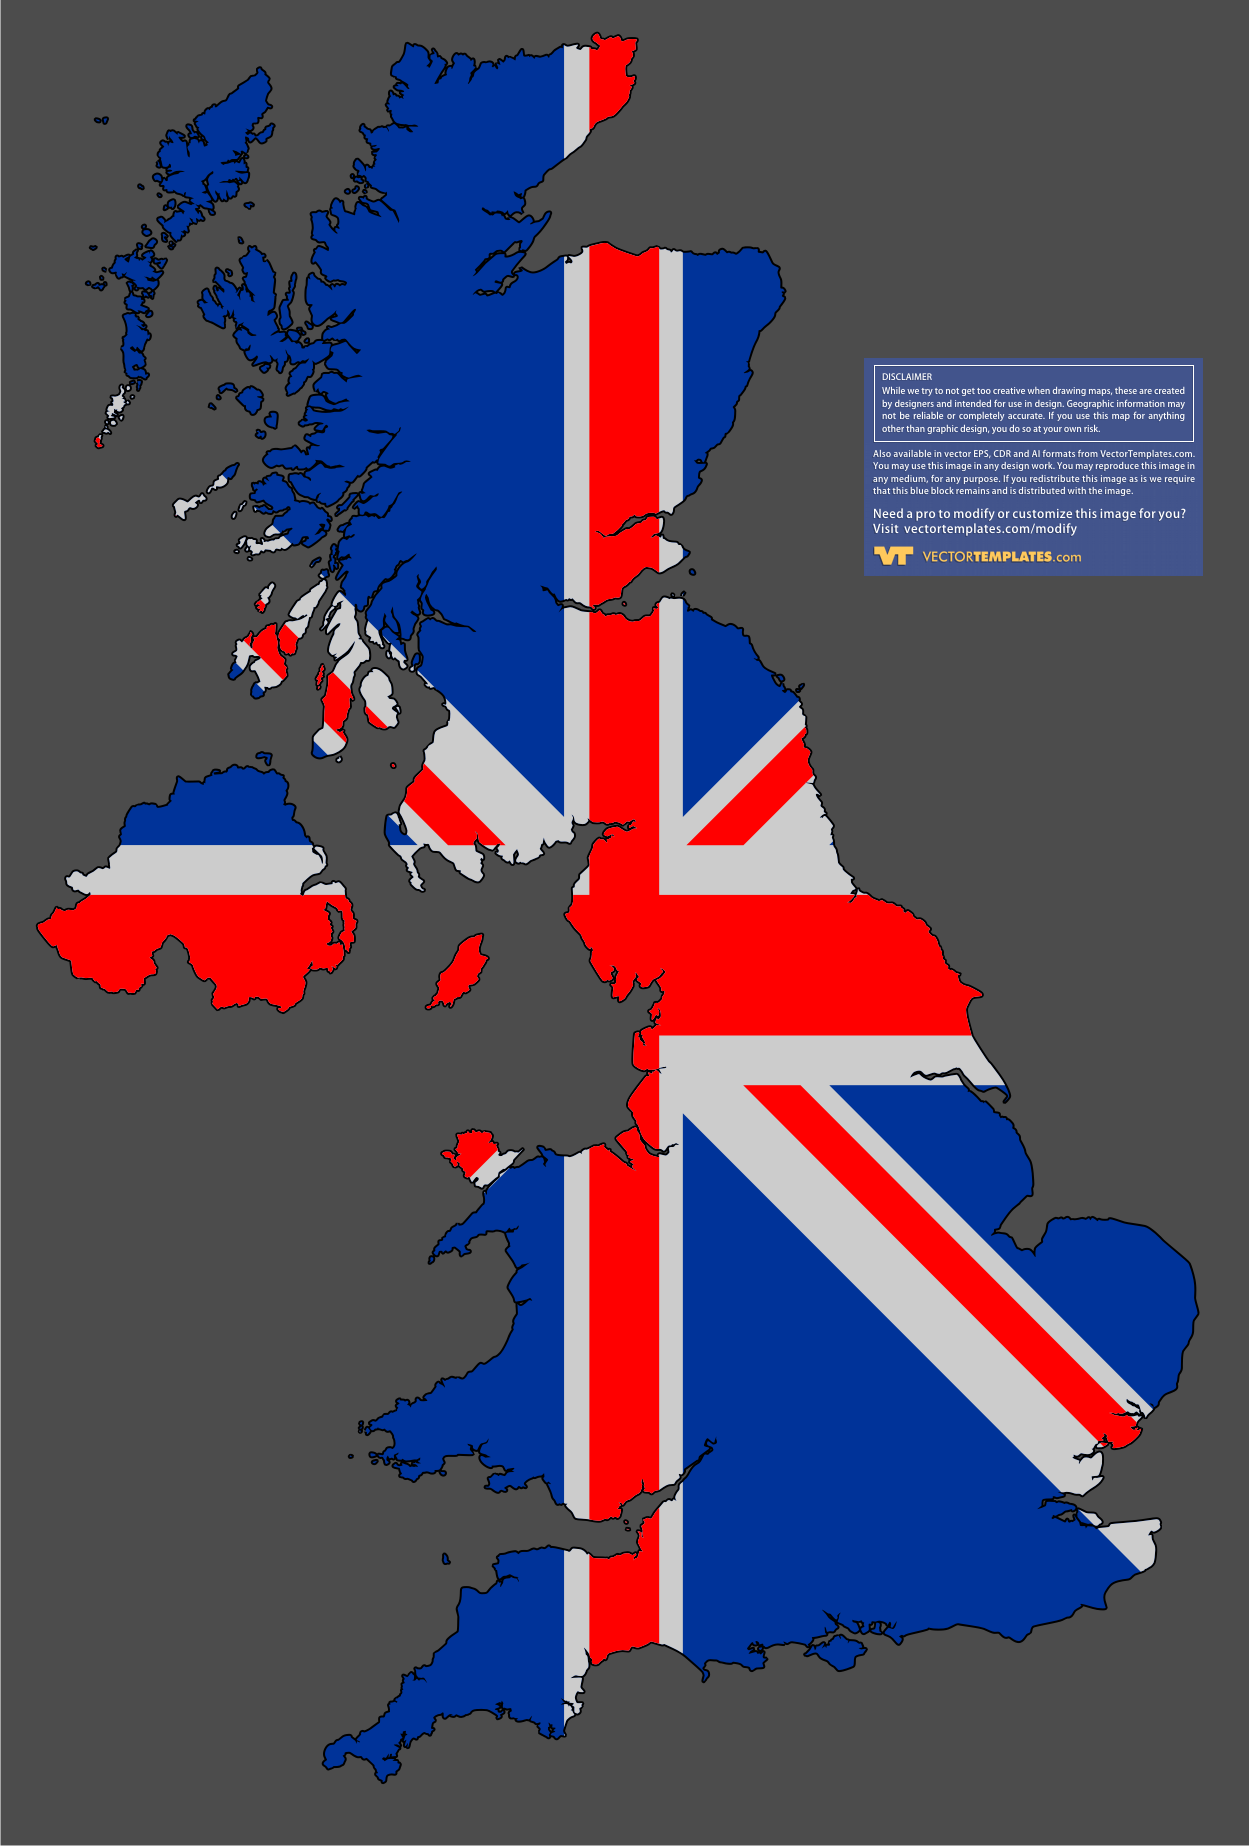 Free download uk map 1also in vector [1249x1846] for your Desktop, Mobile & Tablet. Explore Union Jack Wallpaper Border. Union Jack Wallpaper Border, Union Jack Background, Union Jack Wallpaper